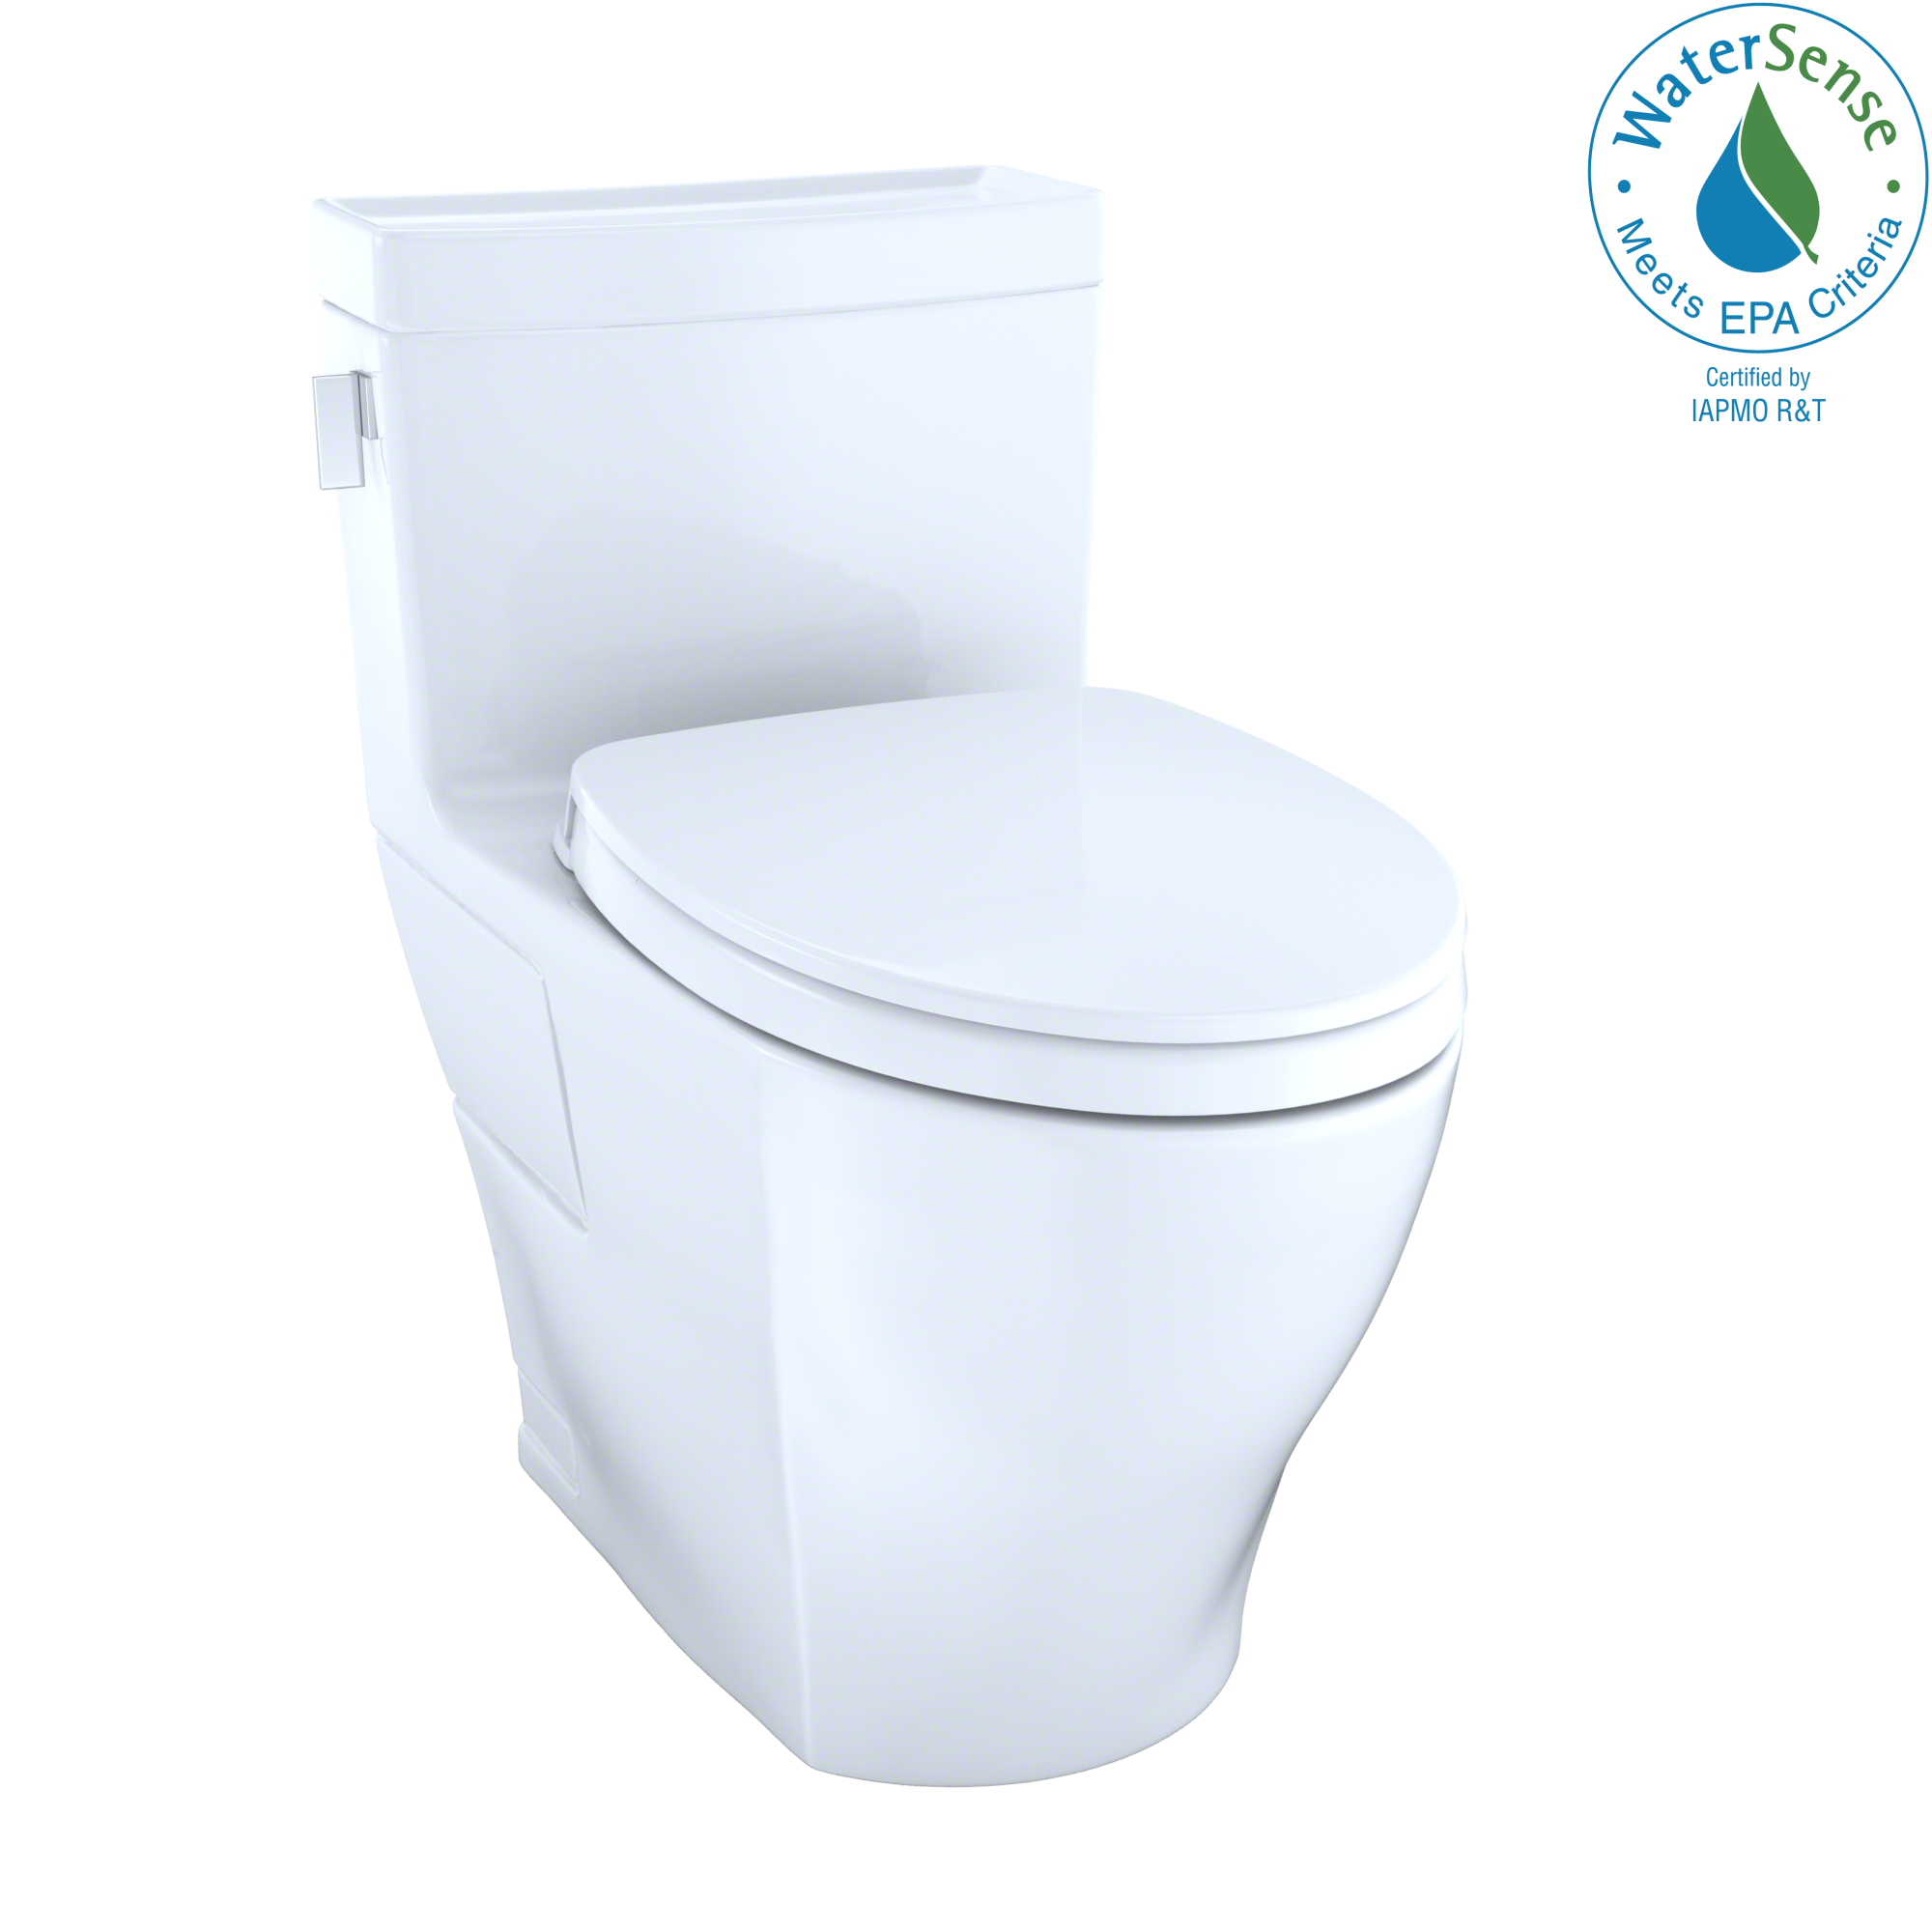 LEGATO™ MS624124CEFG#01 ONE-PIECE TOILET, 1.28GPF, ELONGATED BOWL - WASHLET®+ CONNECTION - SoftClose Seat Included